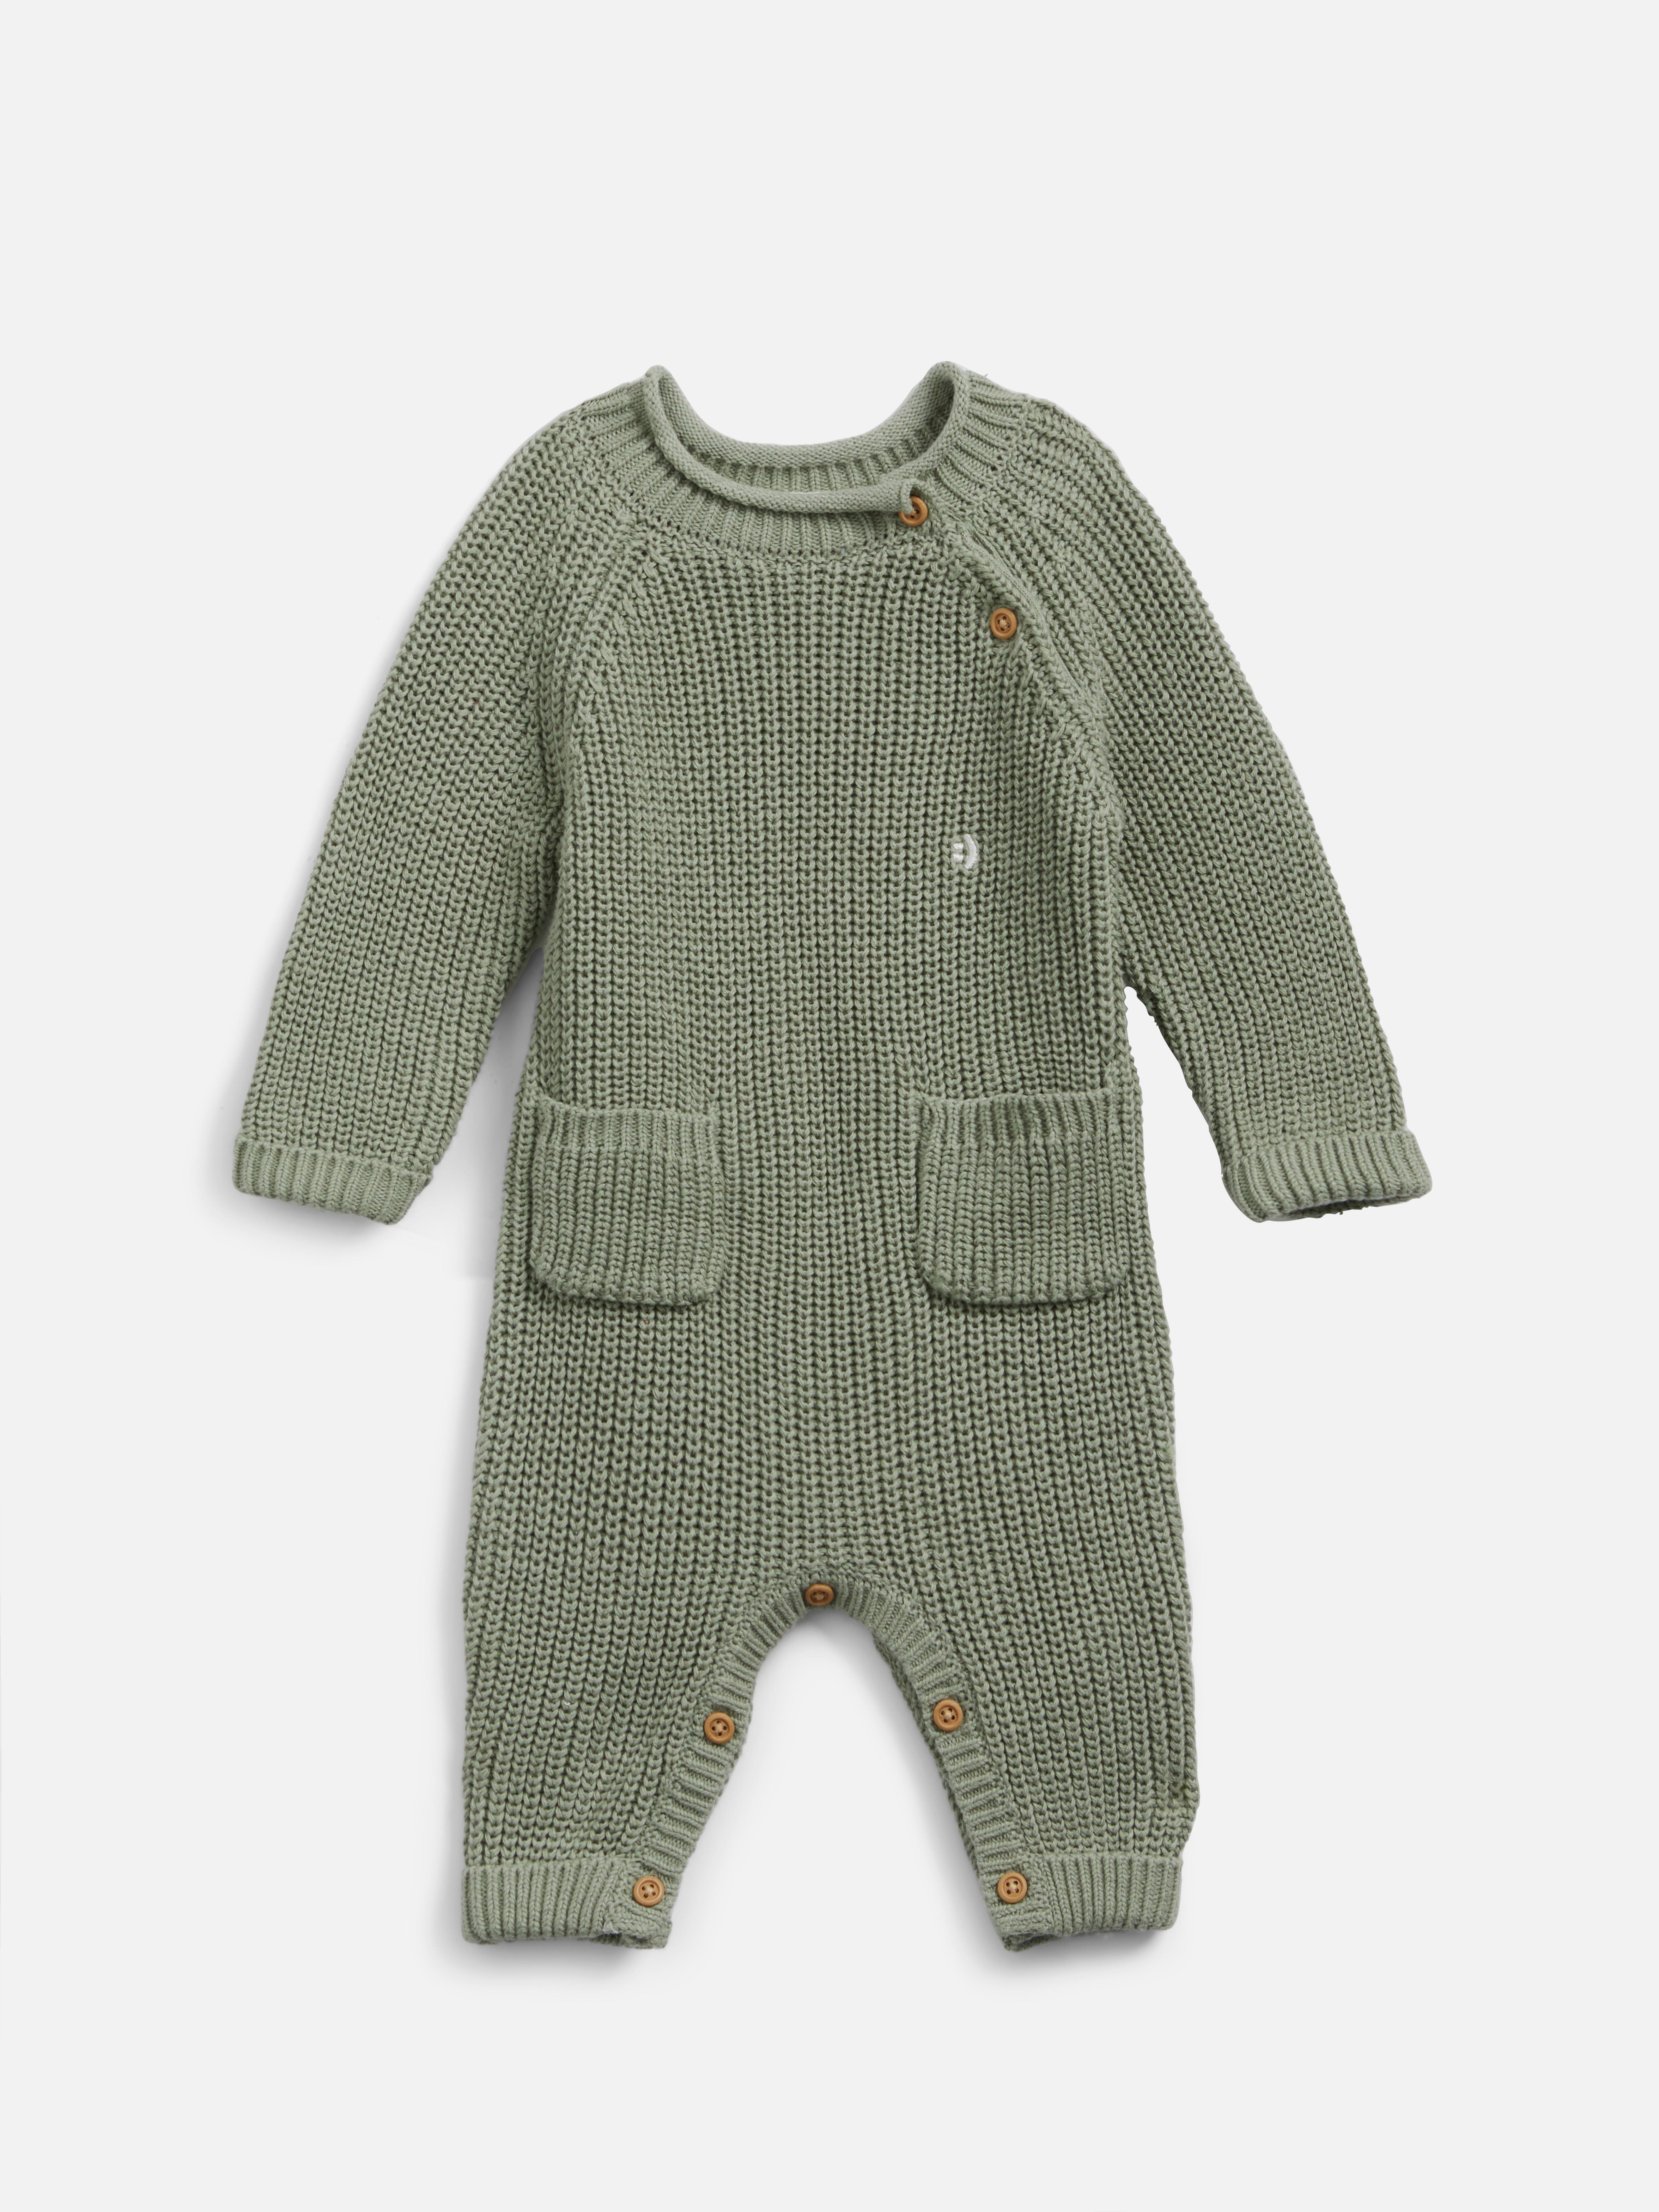 Stacey Solomon Knitted Babygrow